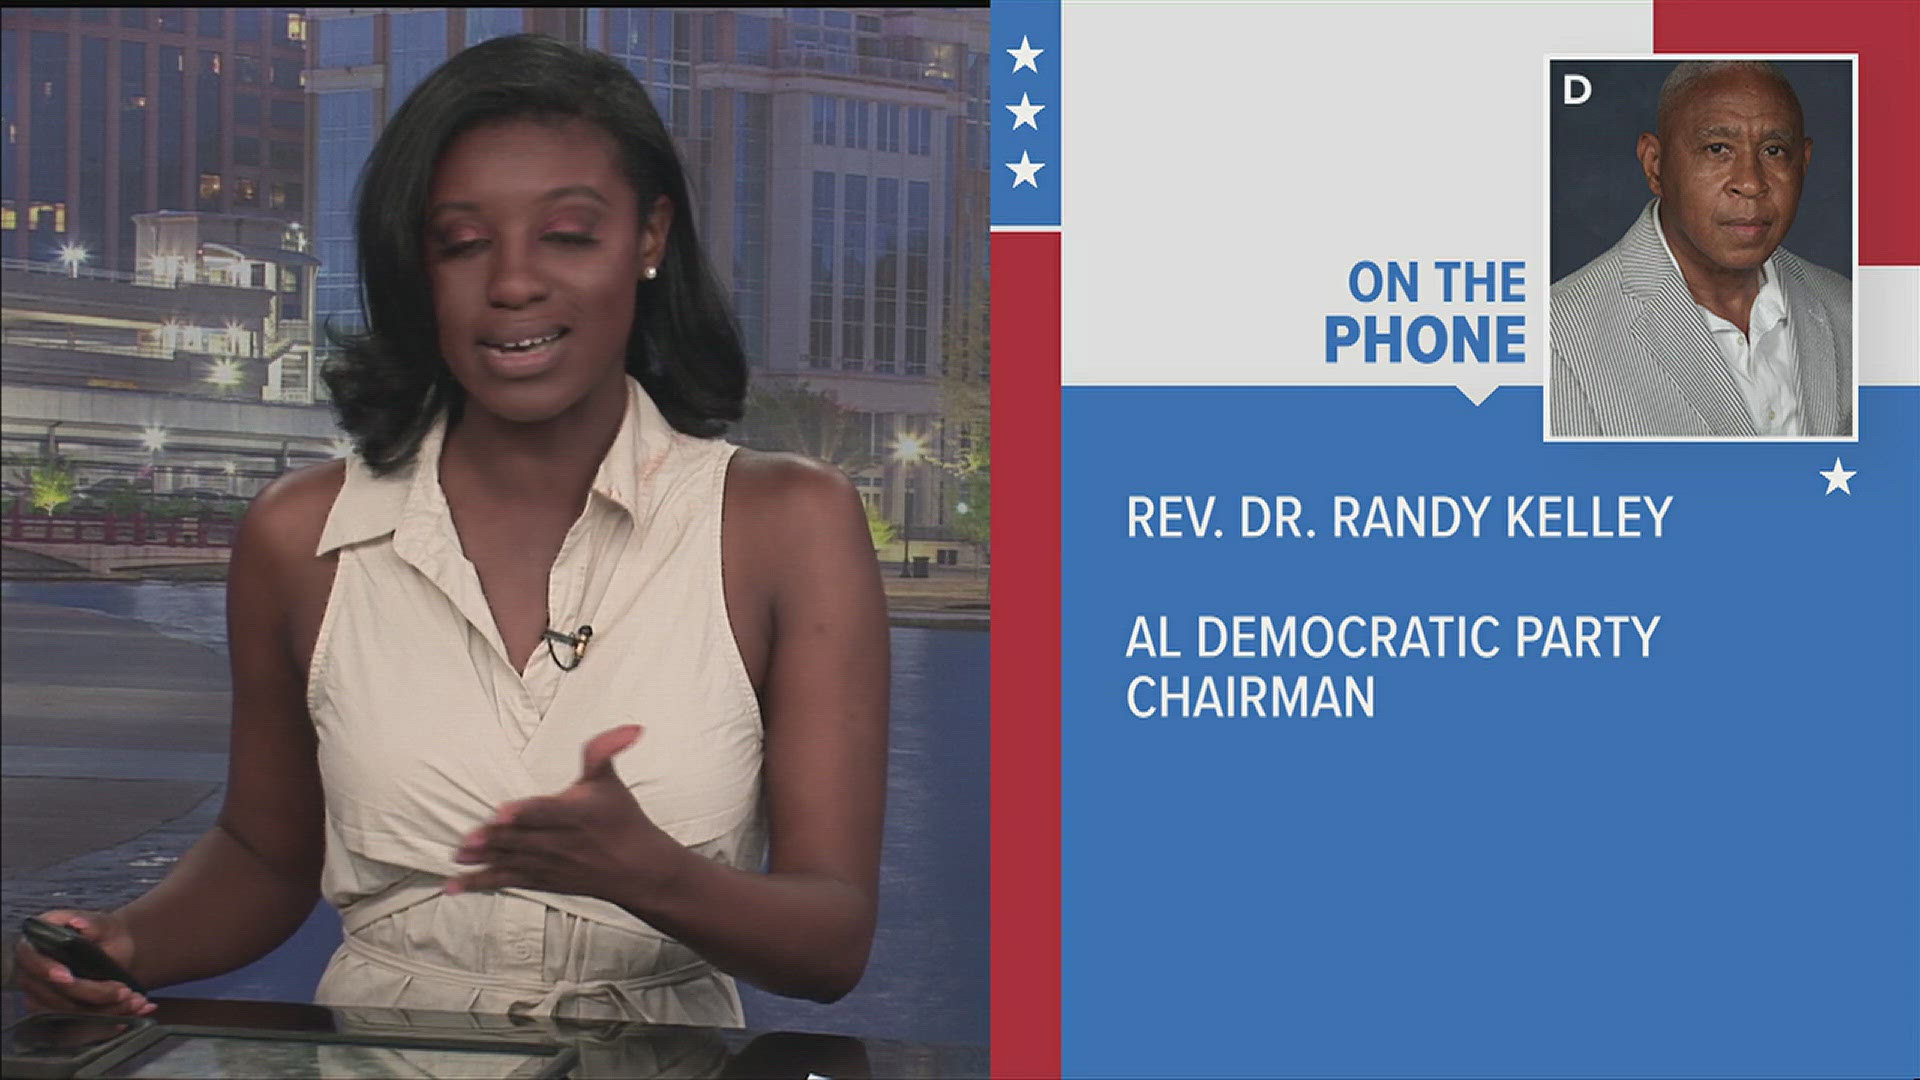 Rev. Dr. Kelley spoke with FOX54's Keneisha Deas shortly after the Biden-Trump debate wrapped up on Thursday.